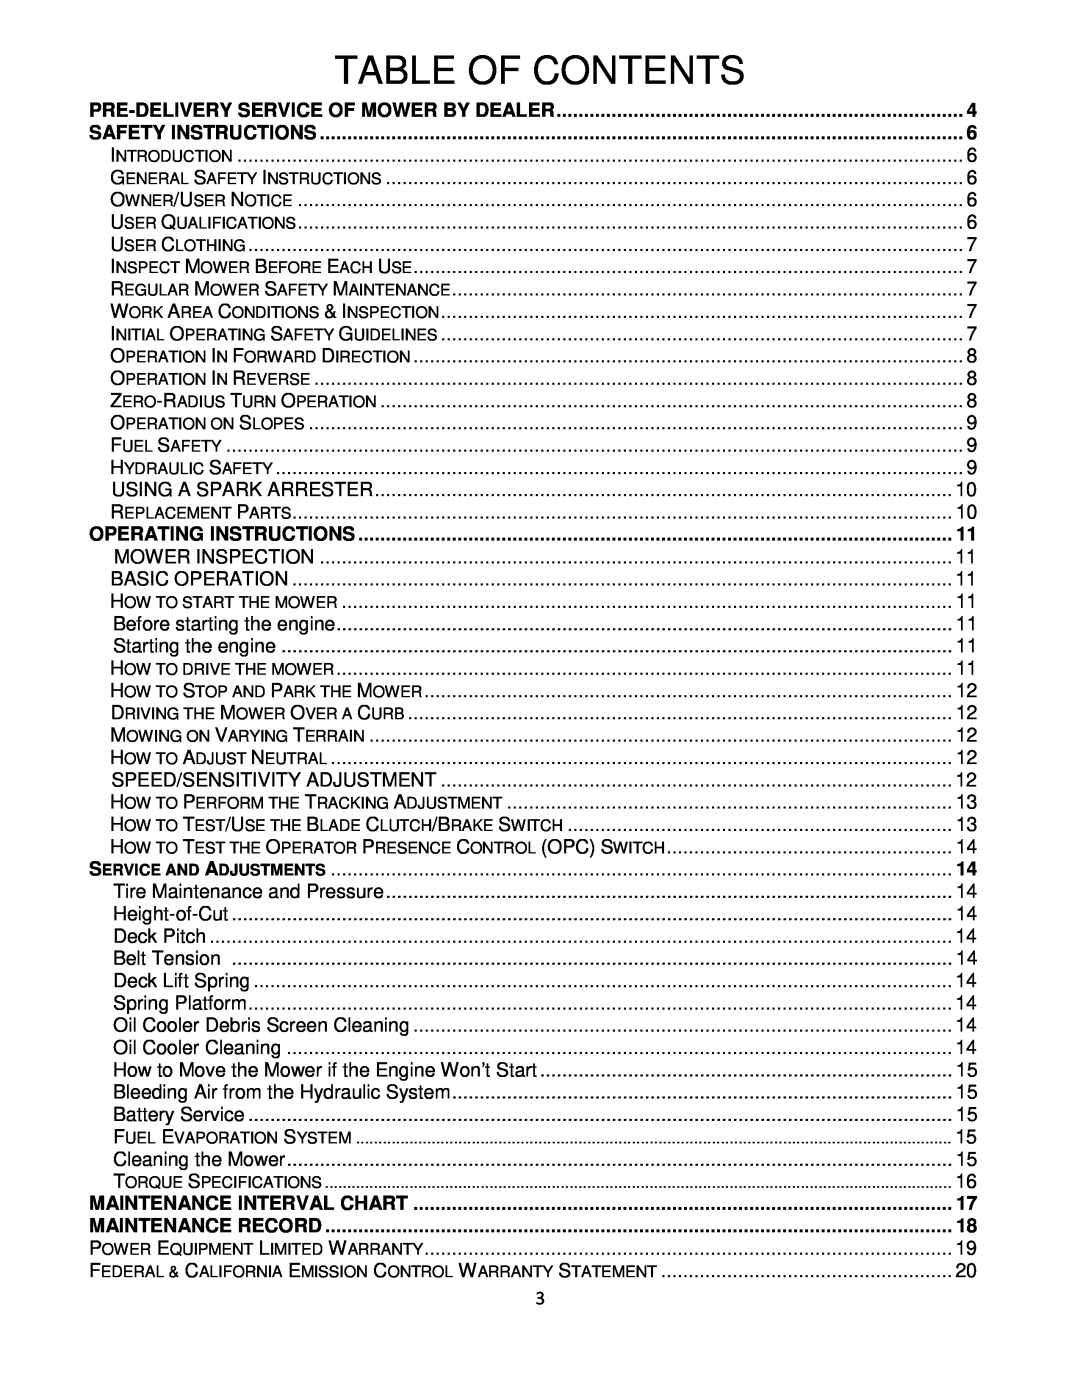 Wright Manufacturing 4212 Table Of Contents, Pre-Deliveryservice Of Mower By Dealer, Safety Instructions, Height-of-Cut 